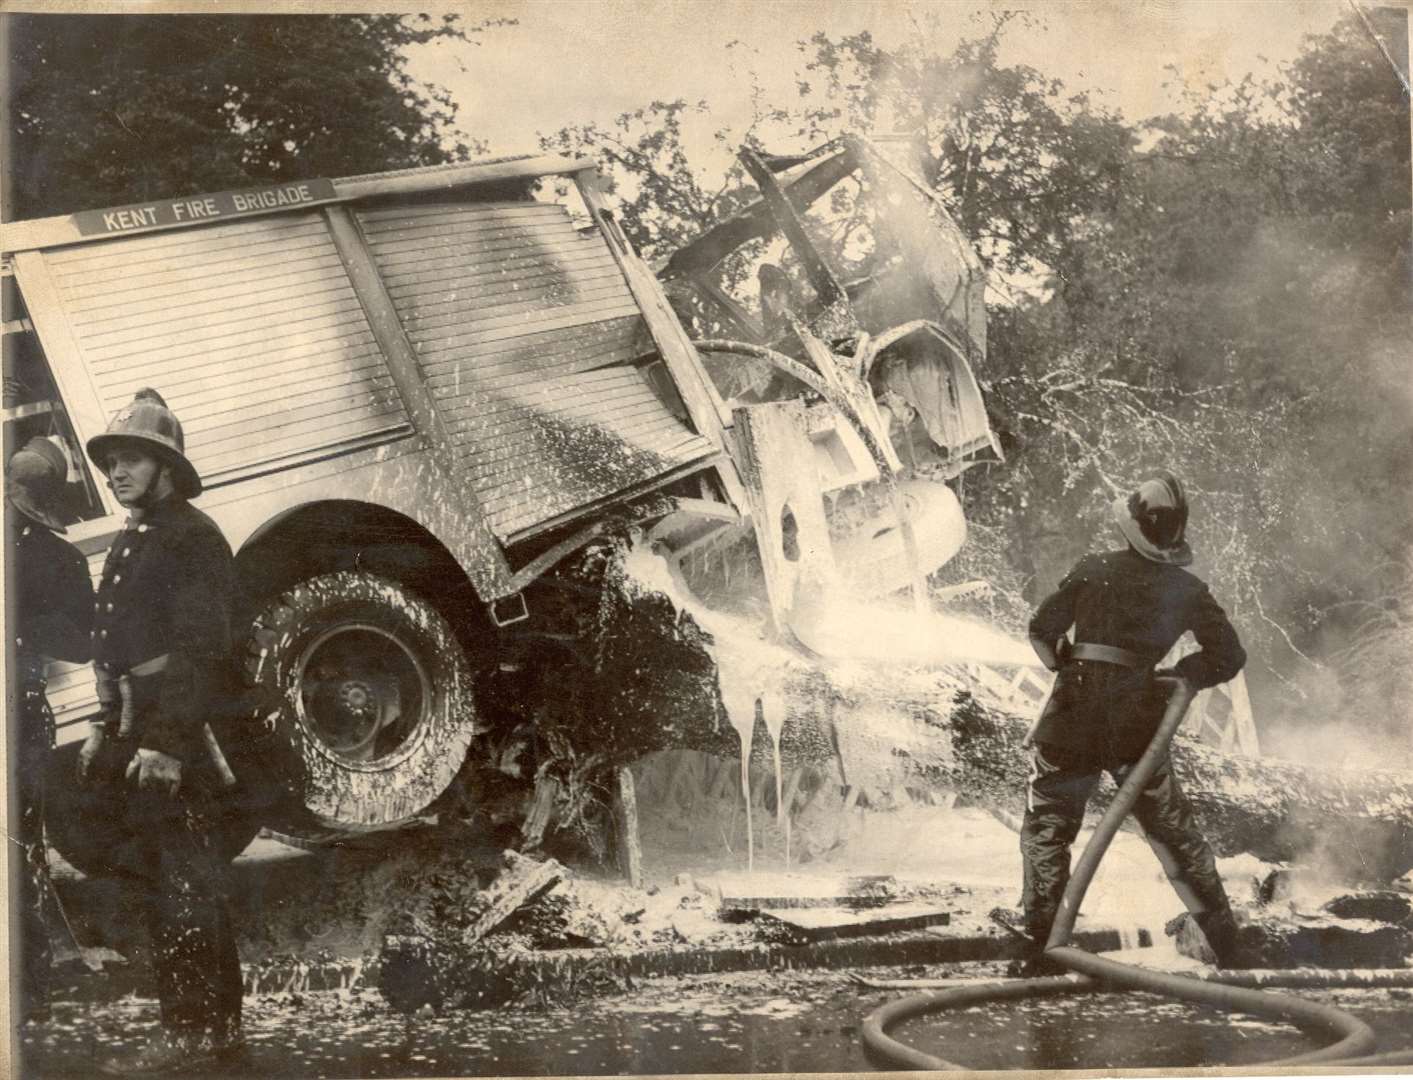 It is 50 years since the tragic crash of a fire appliance in College Road, Maidstone, that cost one firefighter his life and injured seven others